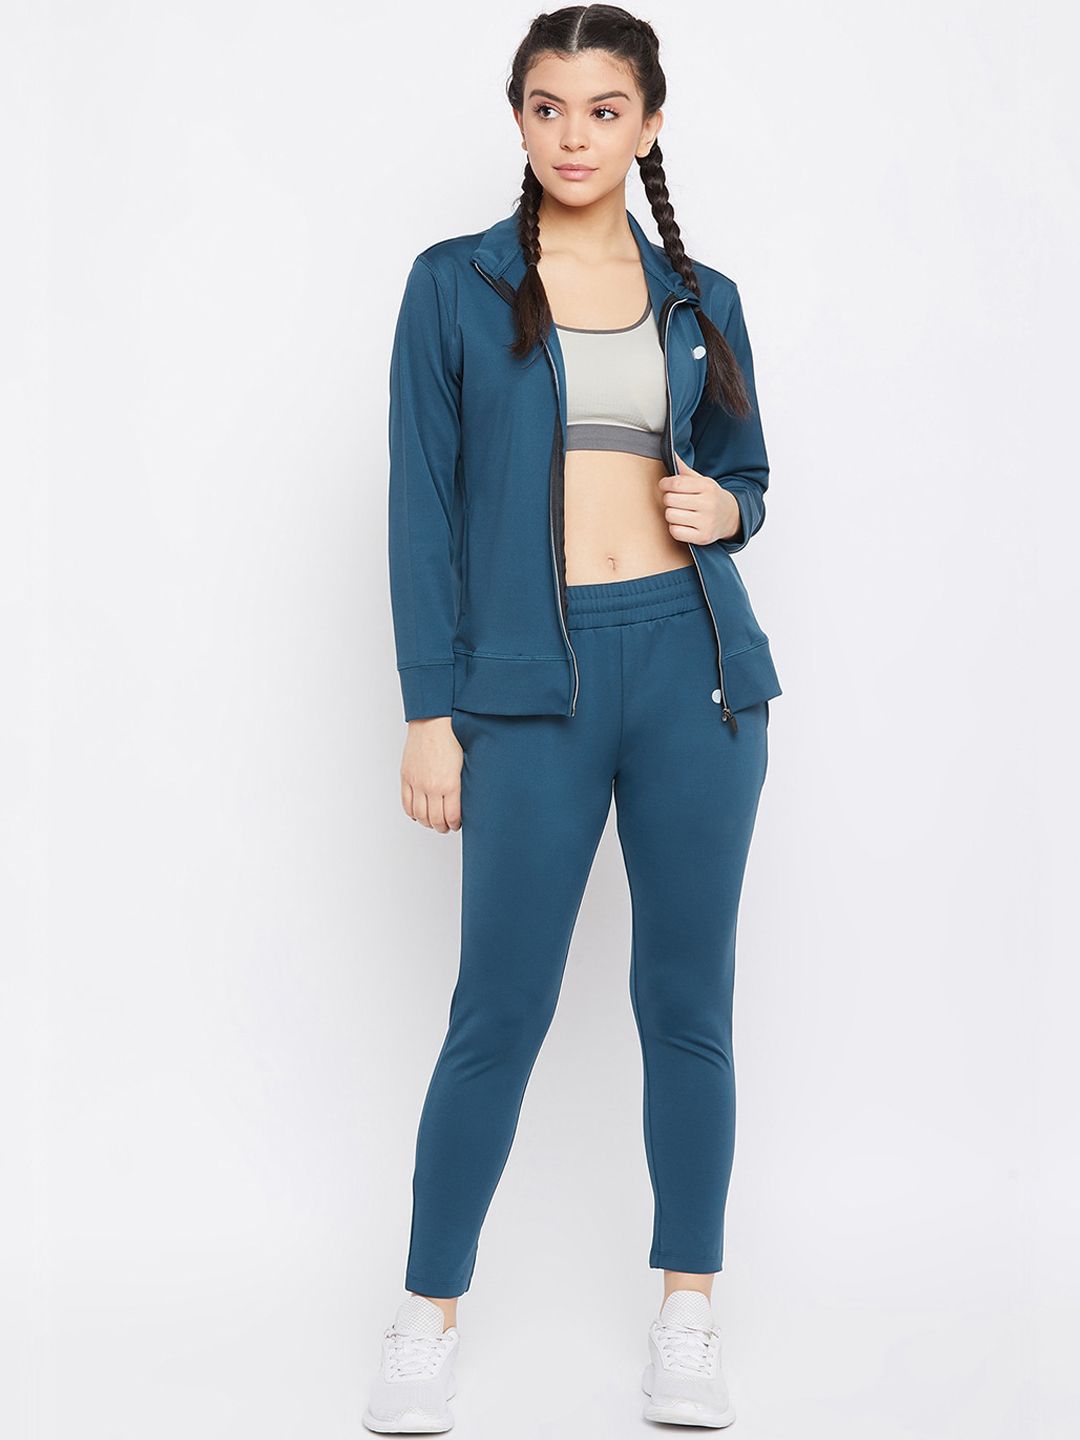 Clovia Women Teal Blue Solid Track Suit Price in India